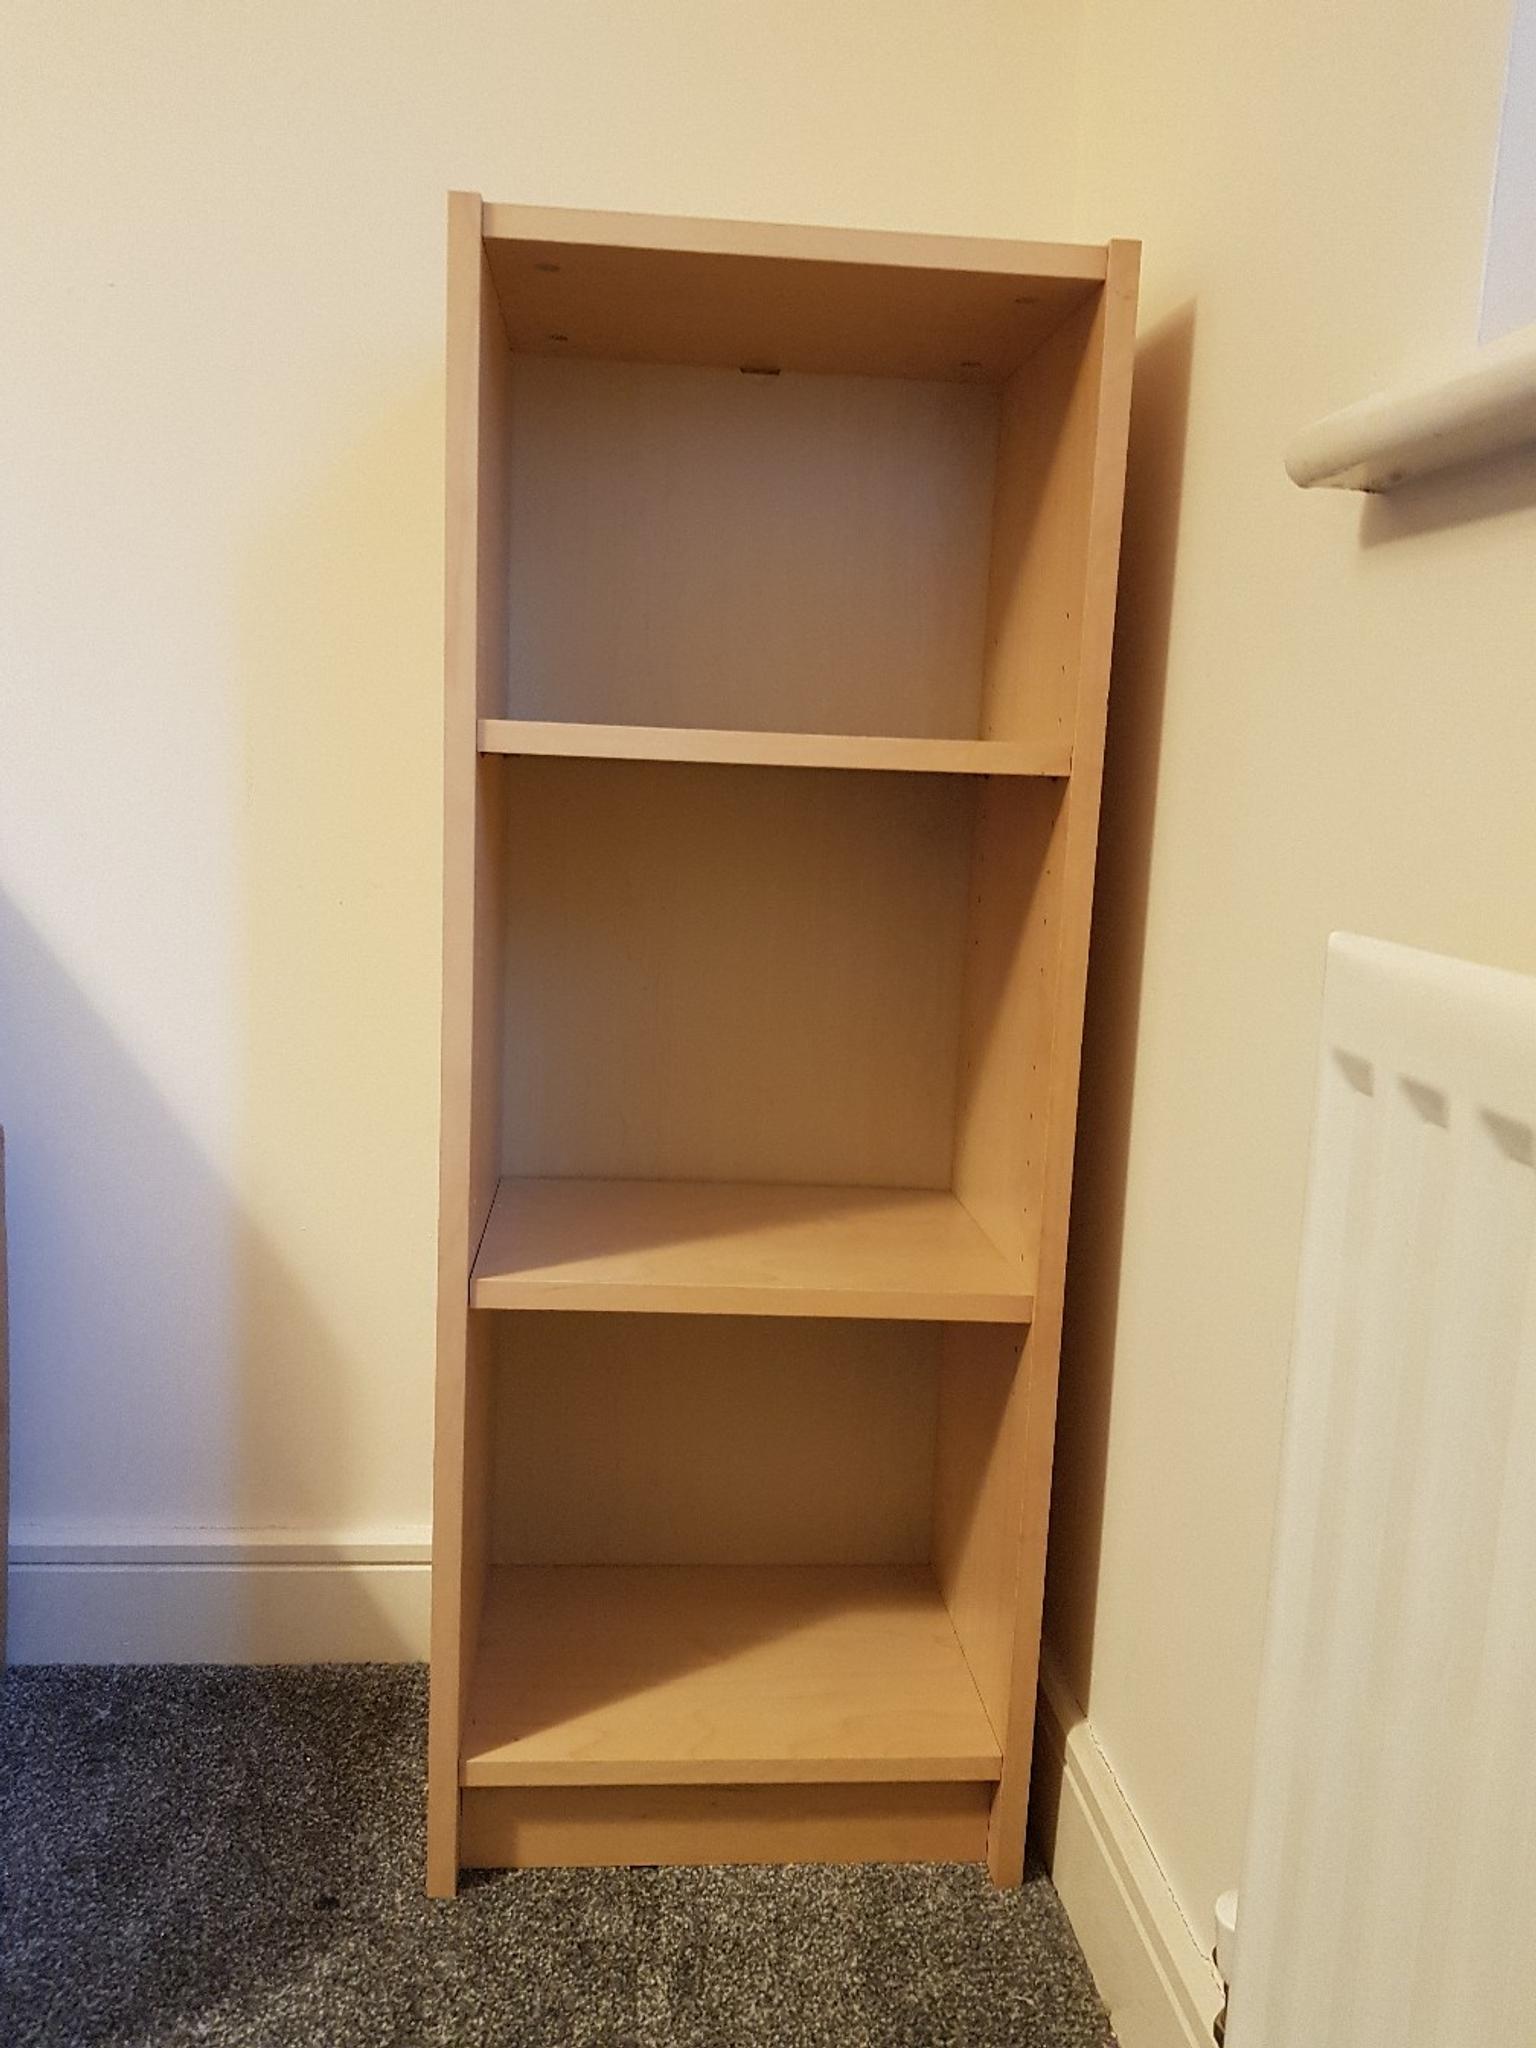 Ikea Tall Bookshelf Bookcase In Lu2 Luton For 5 00 For Sale Shpock